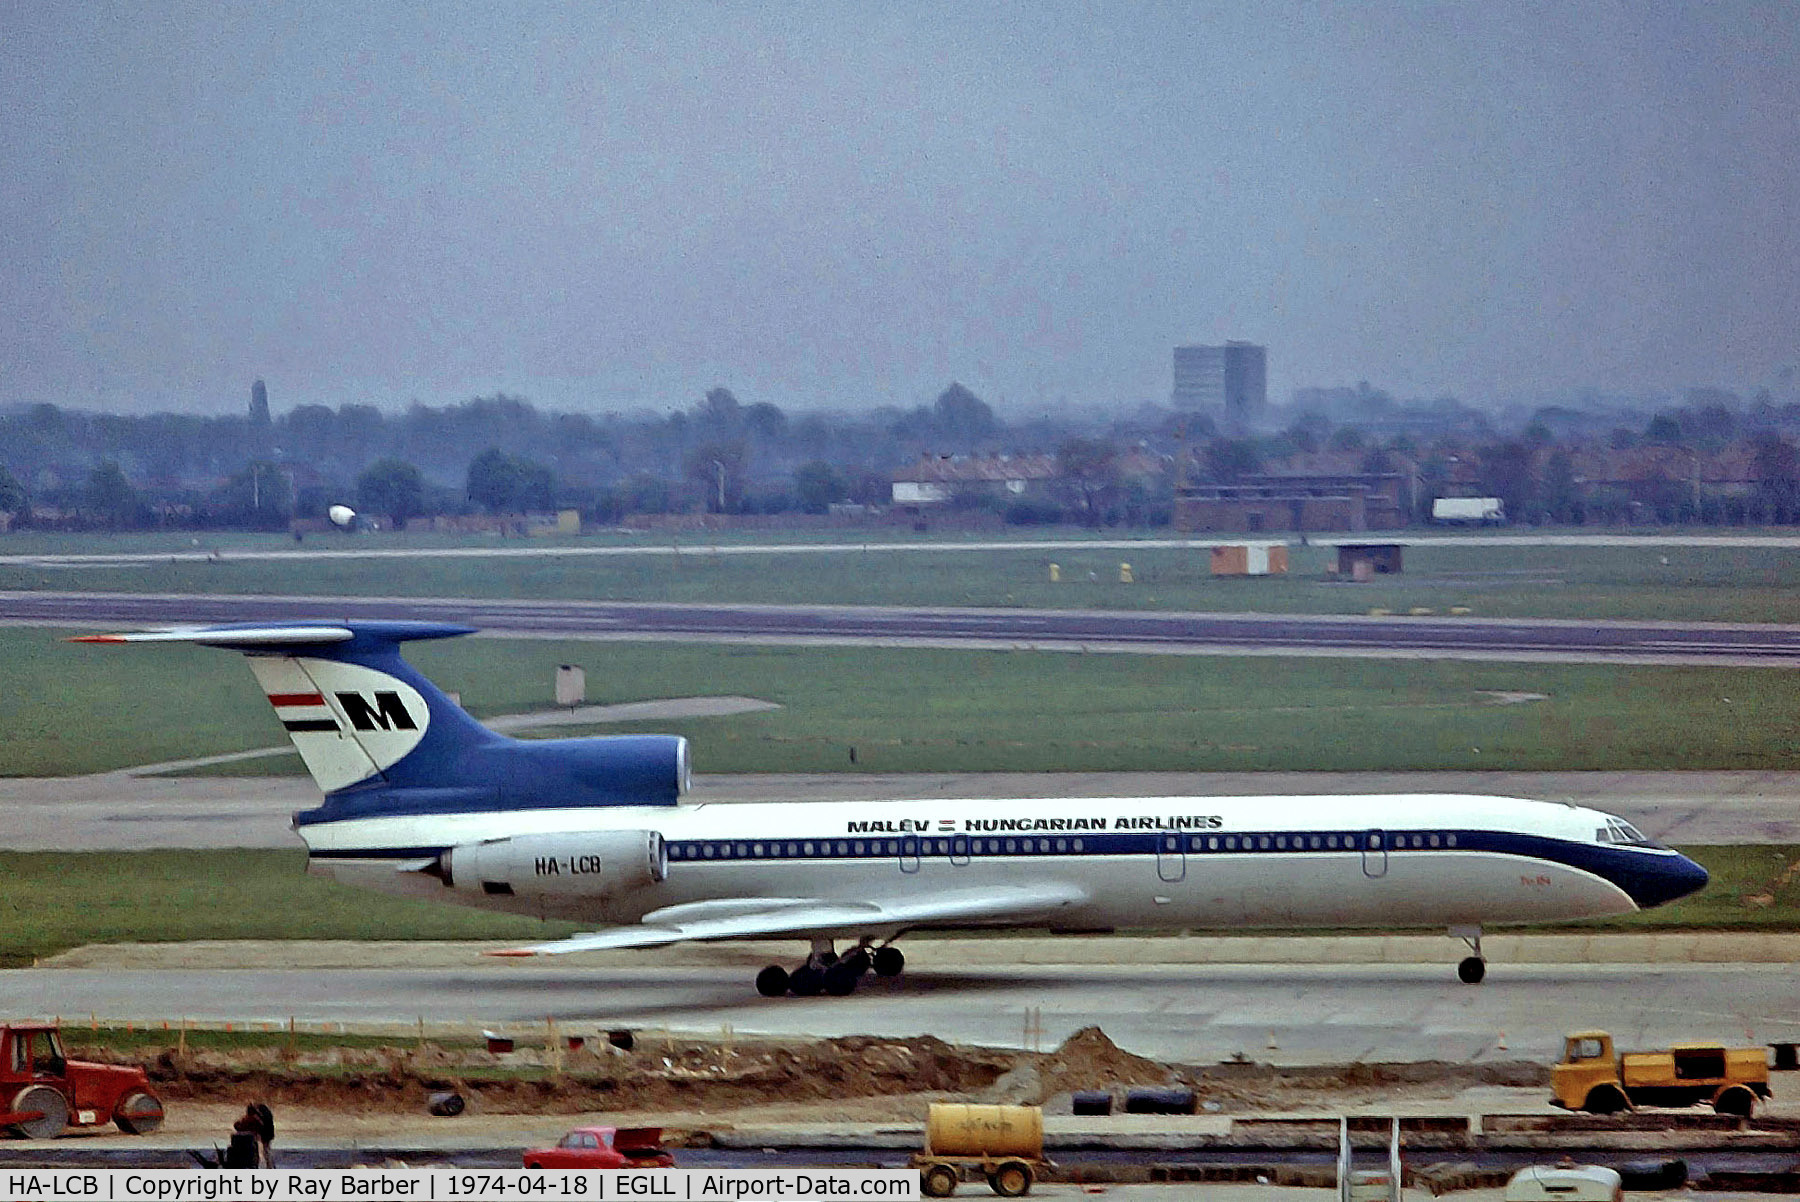 HA-LCB, 1973 Tupolev Tu-154B-2 C/N 73A046, HA-LCB   Tupolev Tu-154B-2 [73A-046] ( Malev-Hungarian Airlines) Heathrow~G 18/04/1974. From a slide. Now used by the Fire Service at Stuttgart airport and marked D-AFSG.